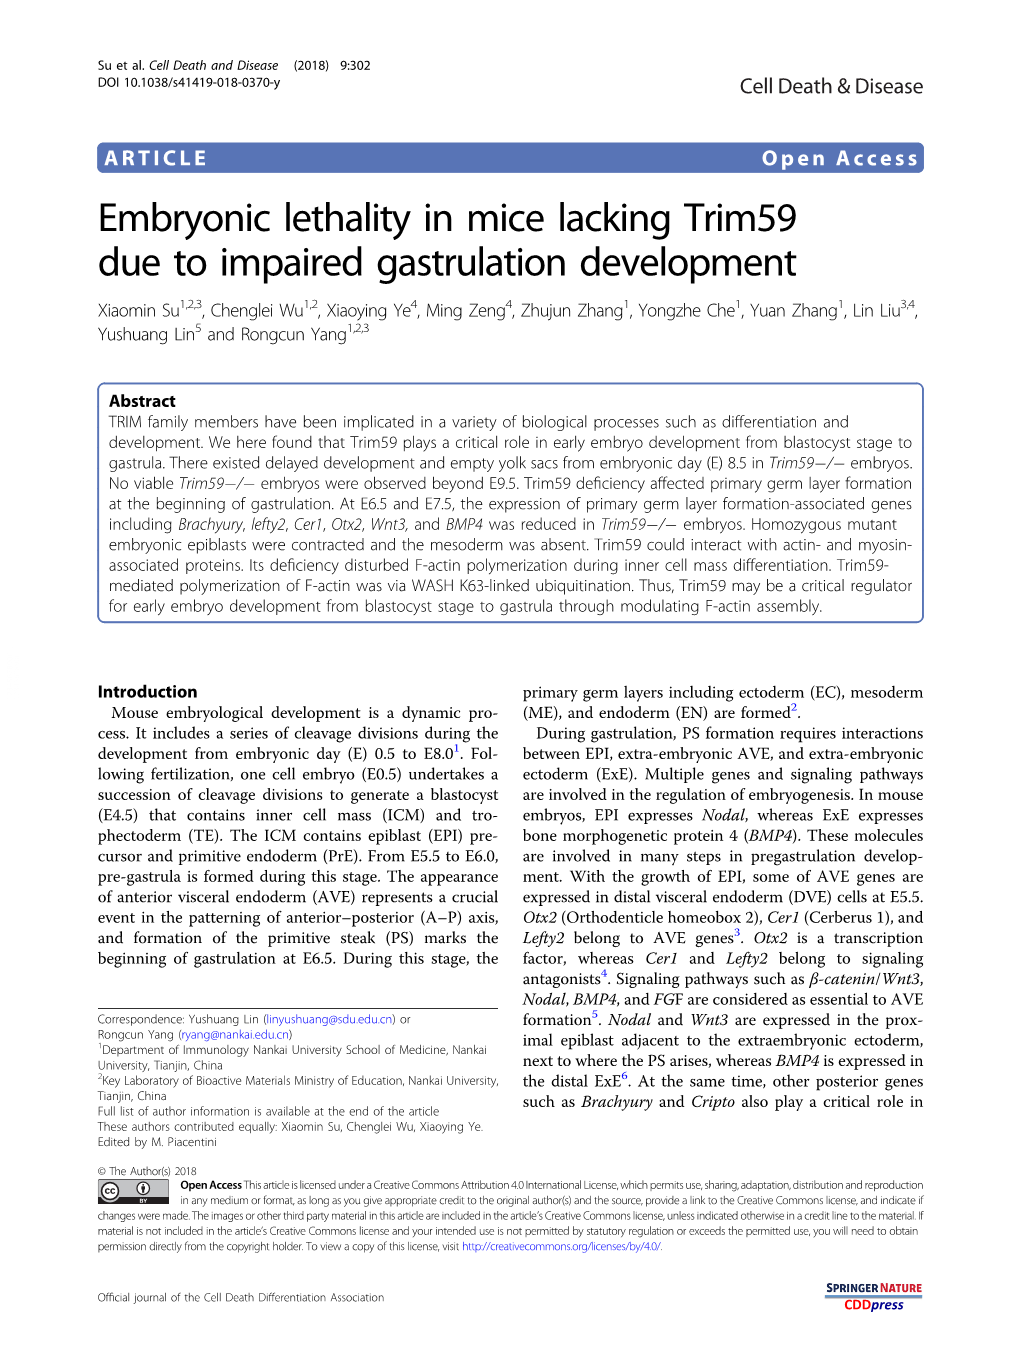 Embryonic Lethality in Mice Lacking Trim59 Due to Impaired Gastrulation